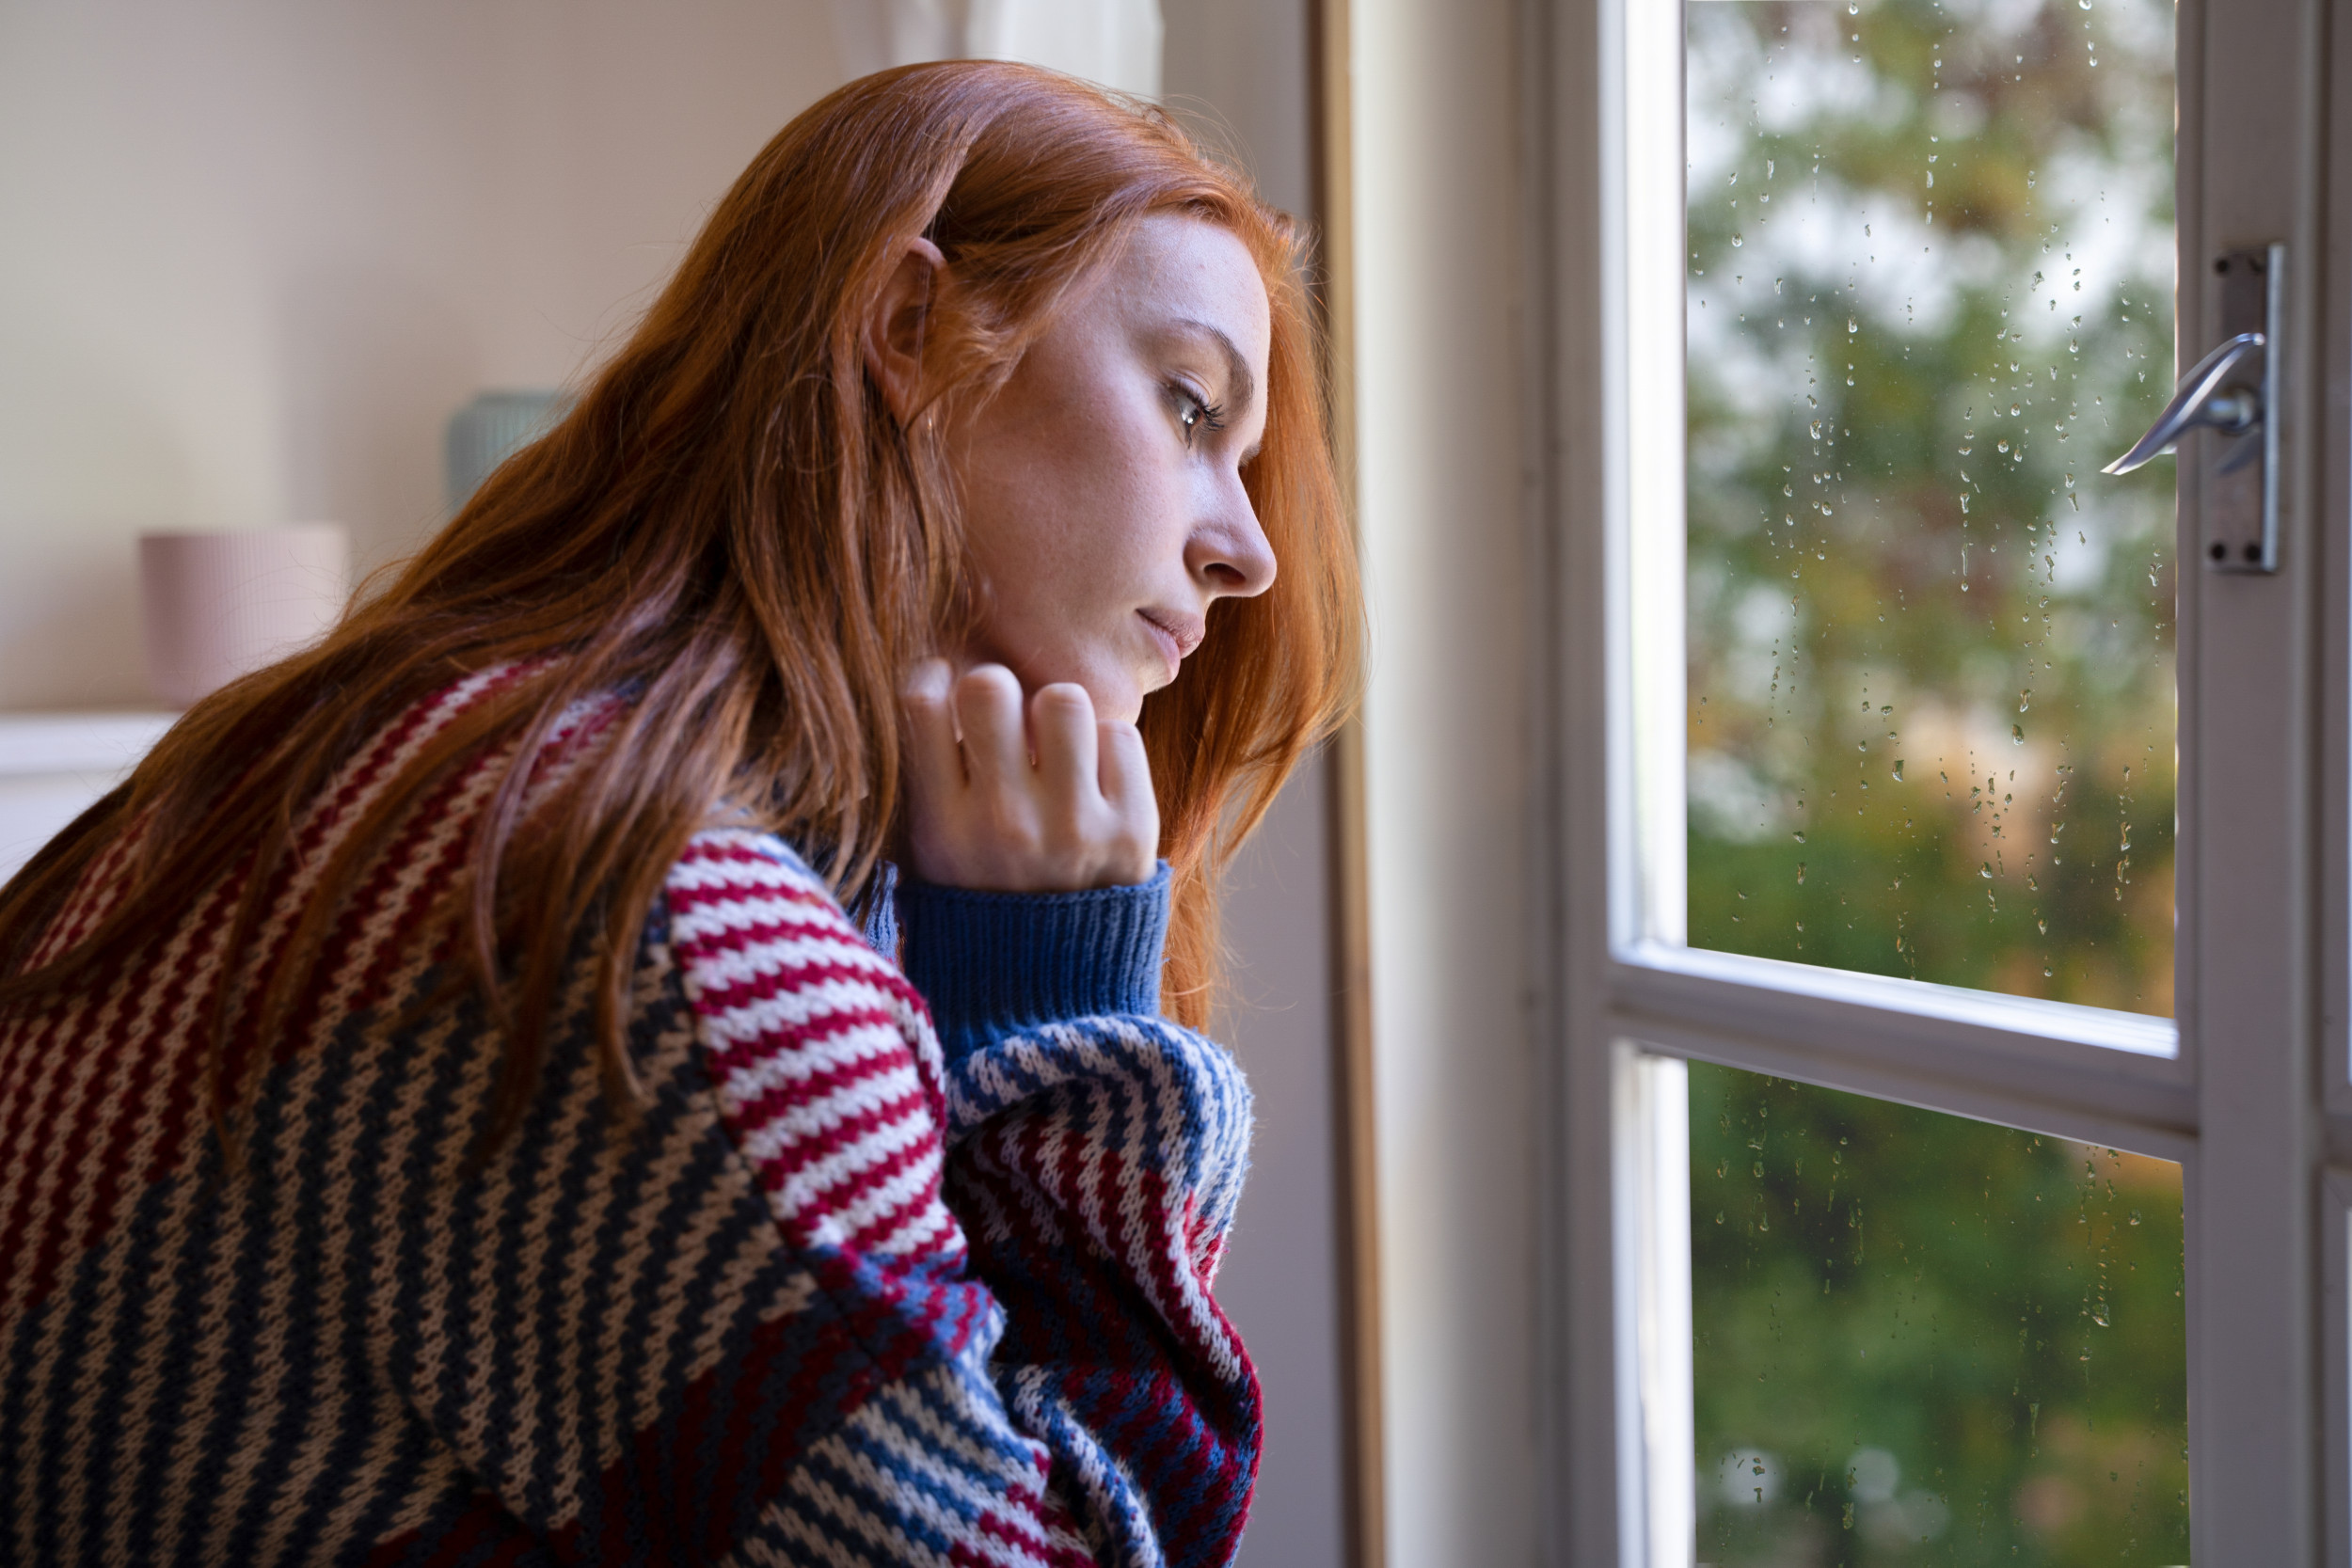 How To Overcome Seasonal Affective Disorder at Home With These Simple Steps